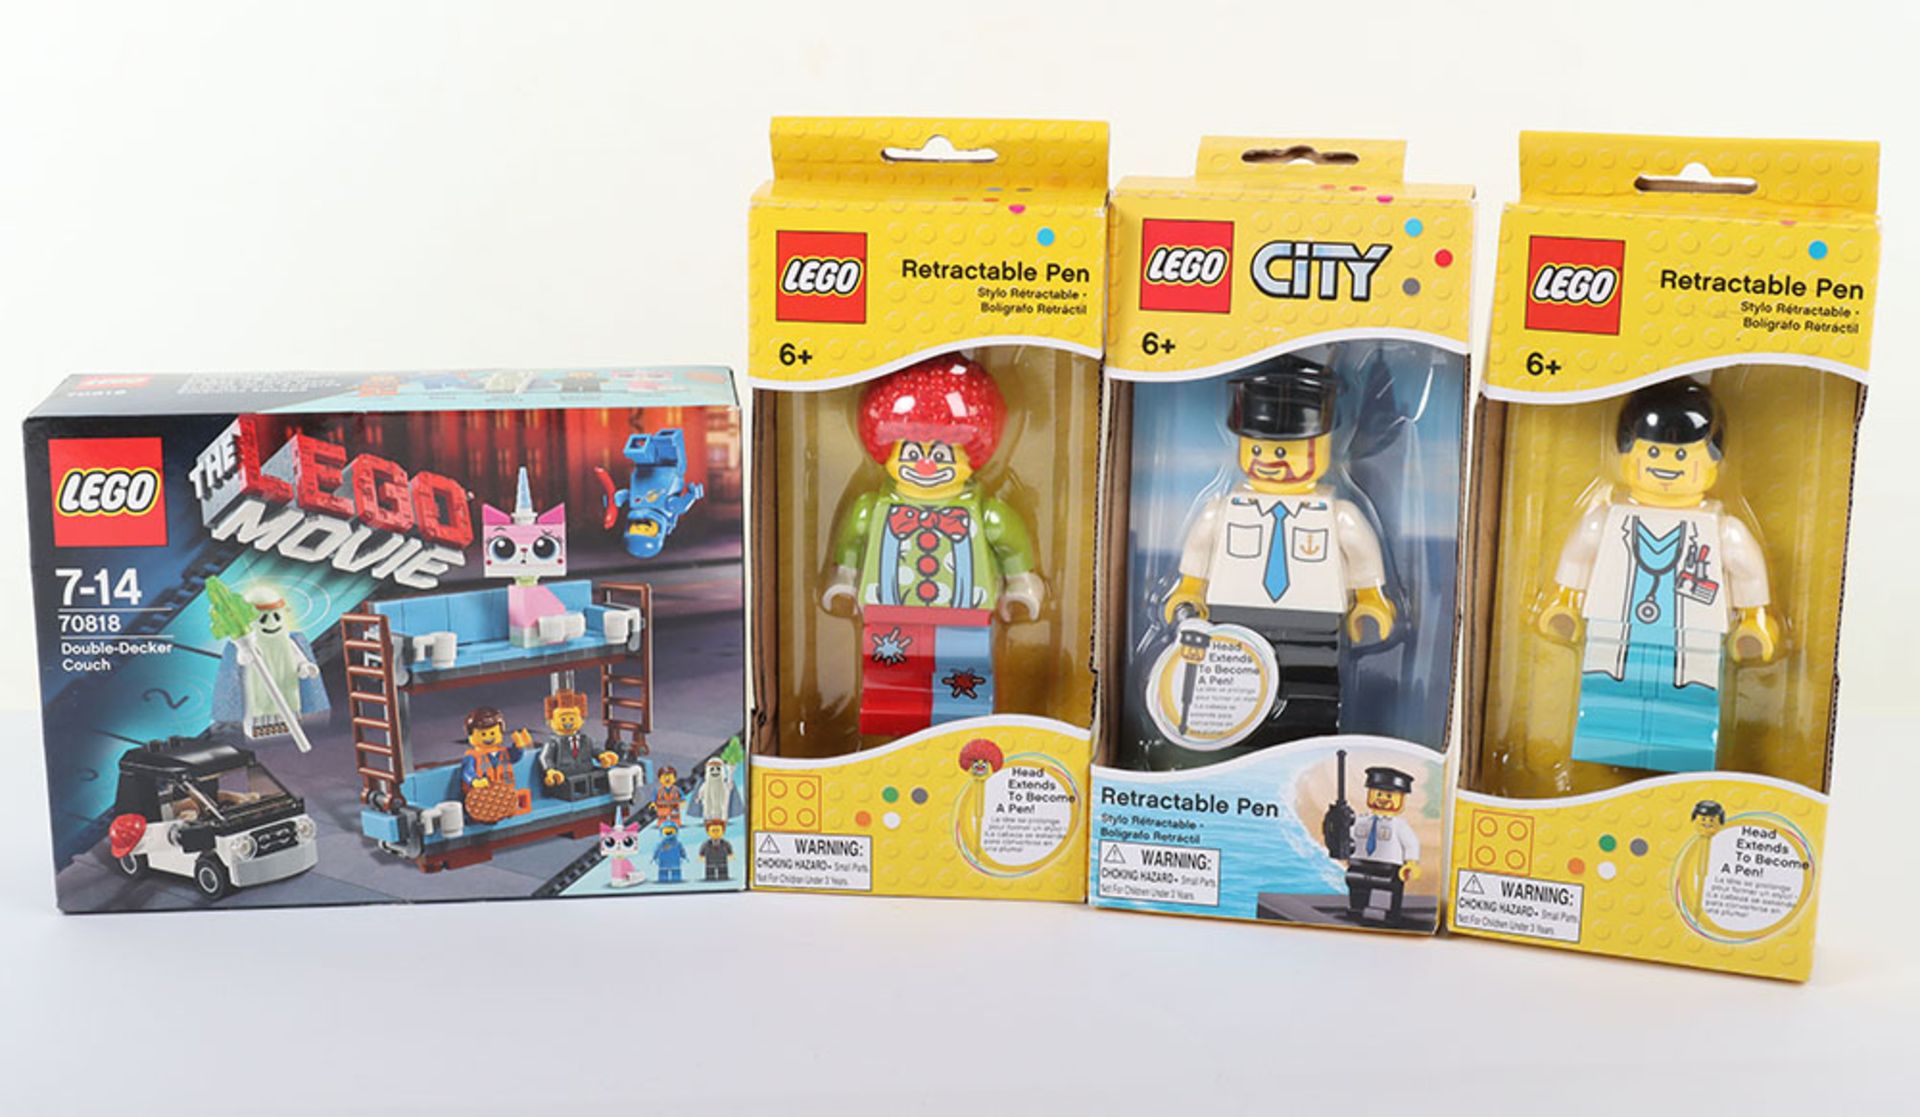 Lego “The Lego Movie” 70818 Double-Decker Couch sealed with minifigure pens